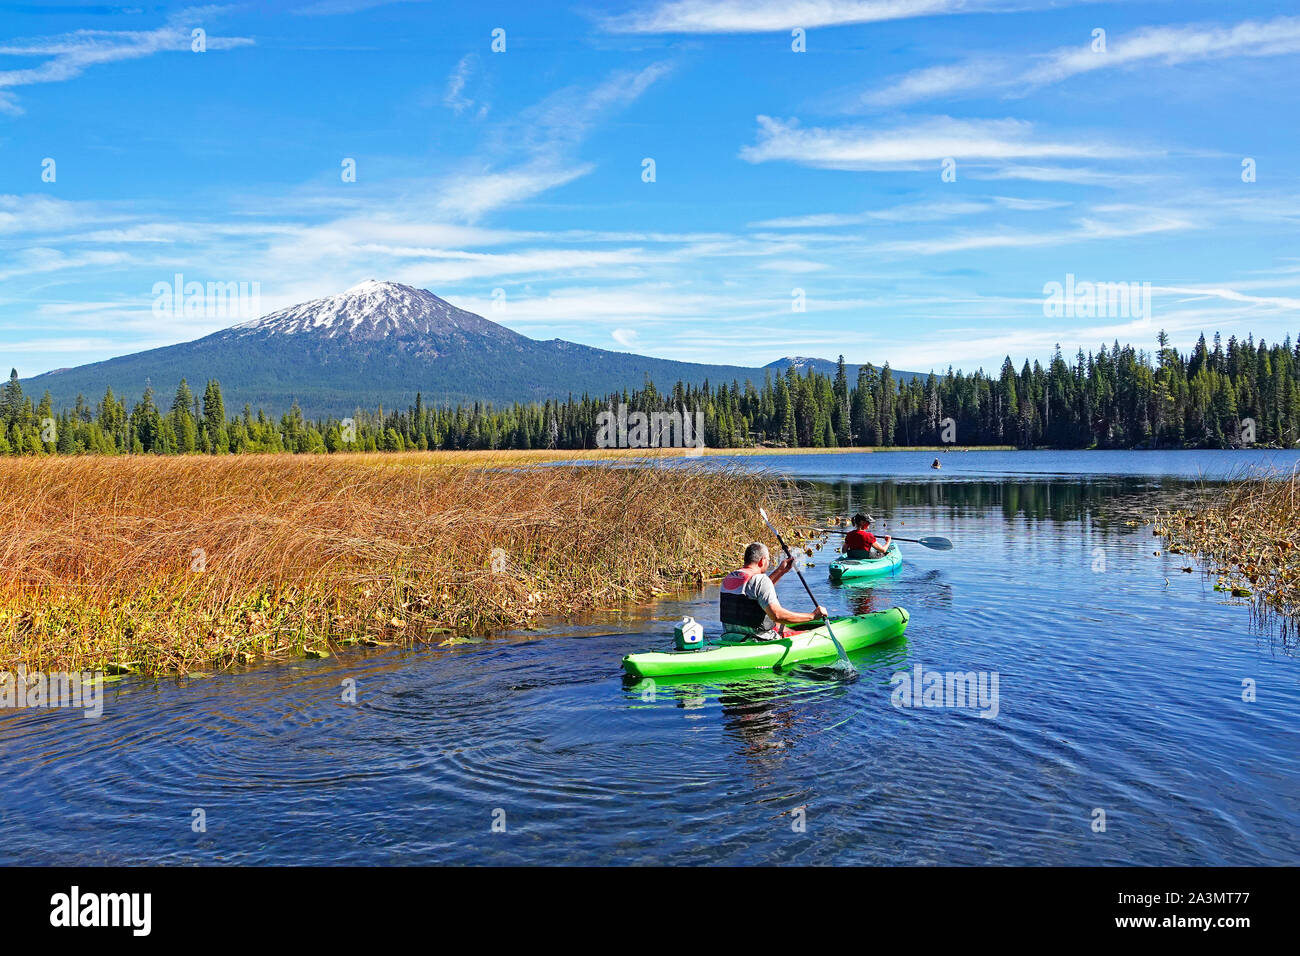 Kayakers on Hosmer Lake in the Oregon Cascade Mountains in early autumn. Mount Bachelor is in the background. Stock Photo